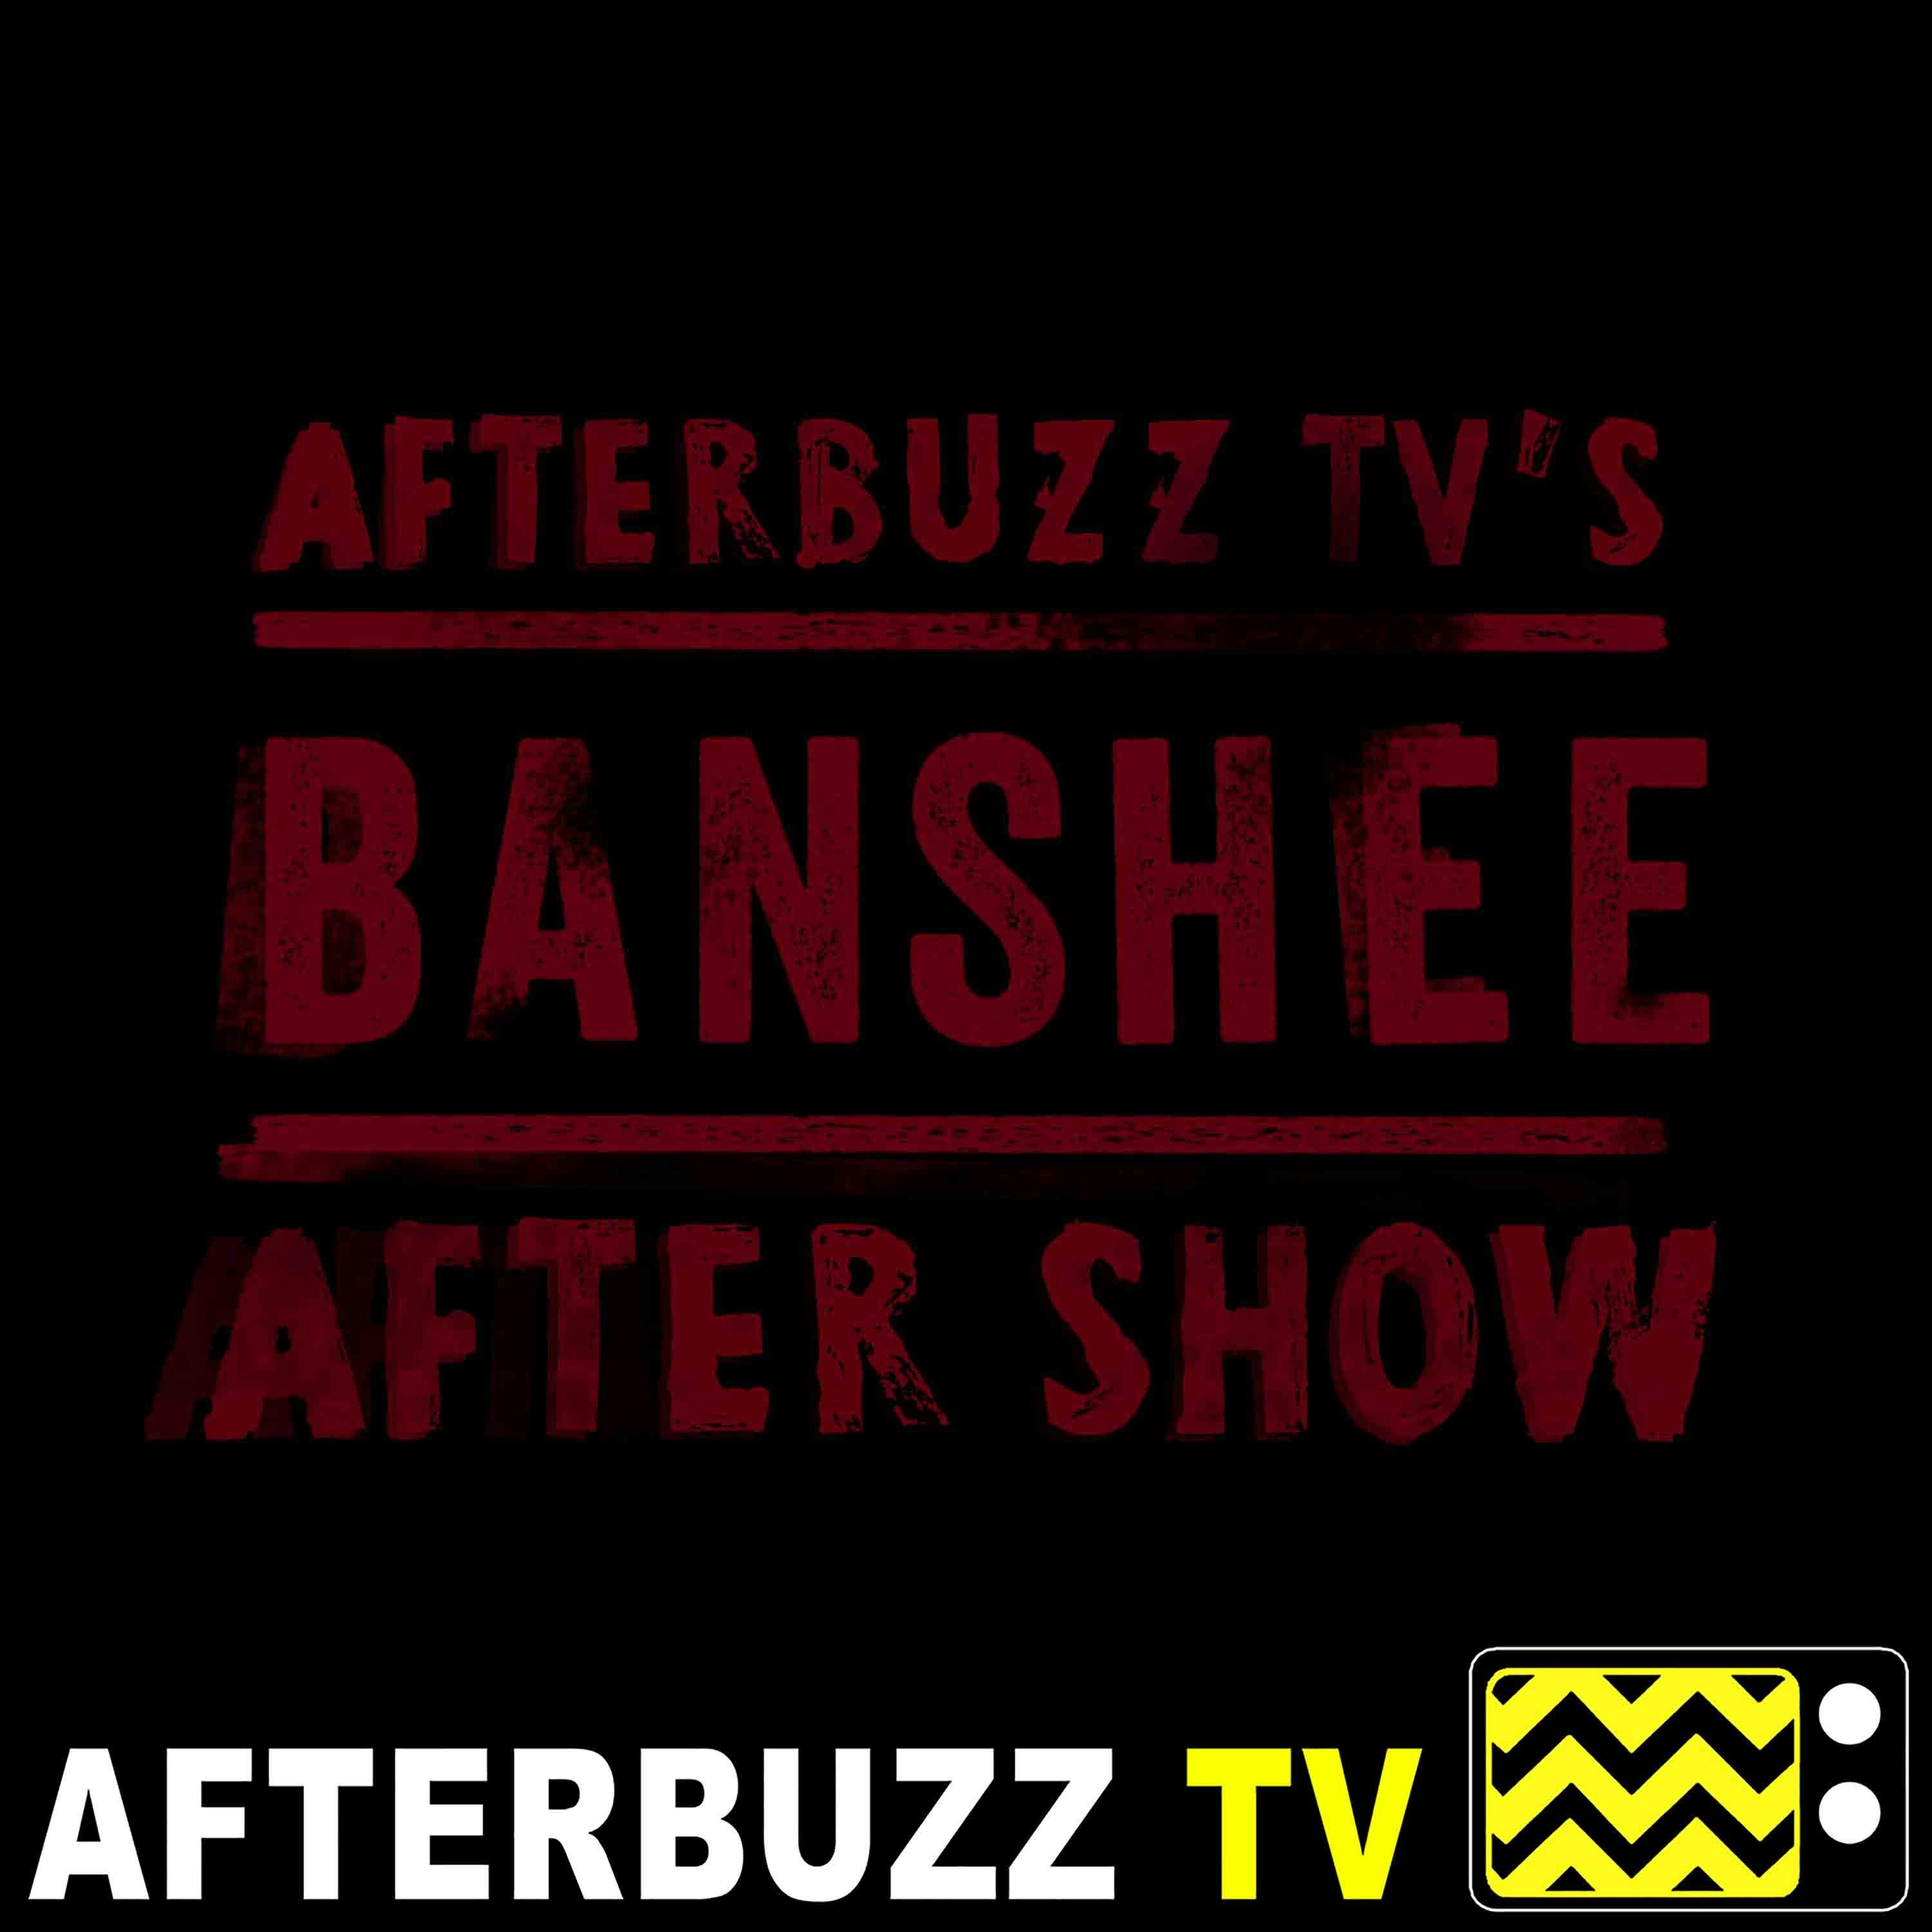 Banshee S:4 | Ana Ayora Guests On Only One Way A Dog Fight Ends E:6 | AfterBuzz TV AfterShow